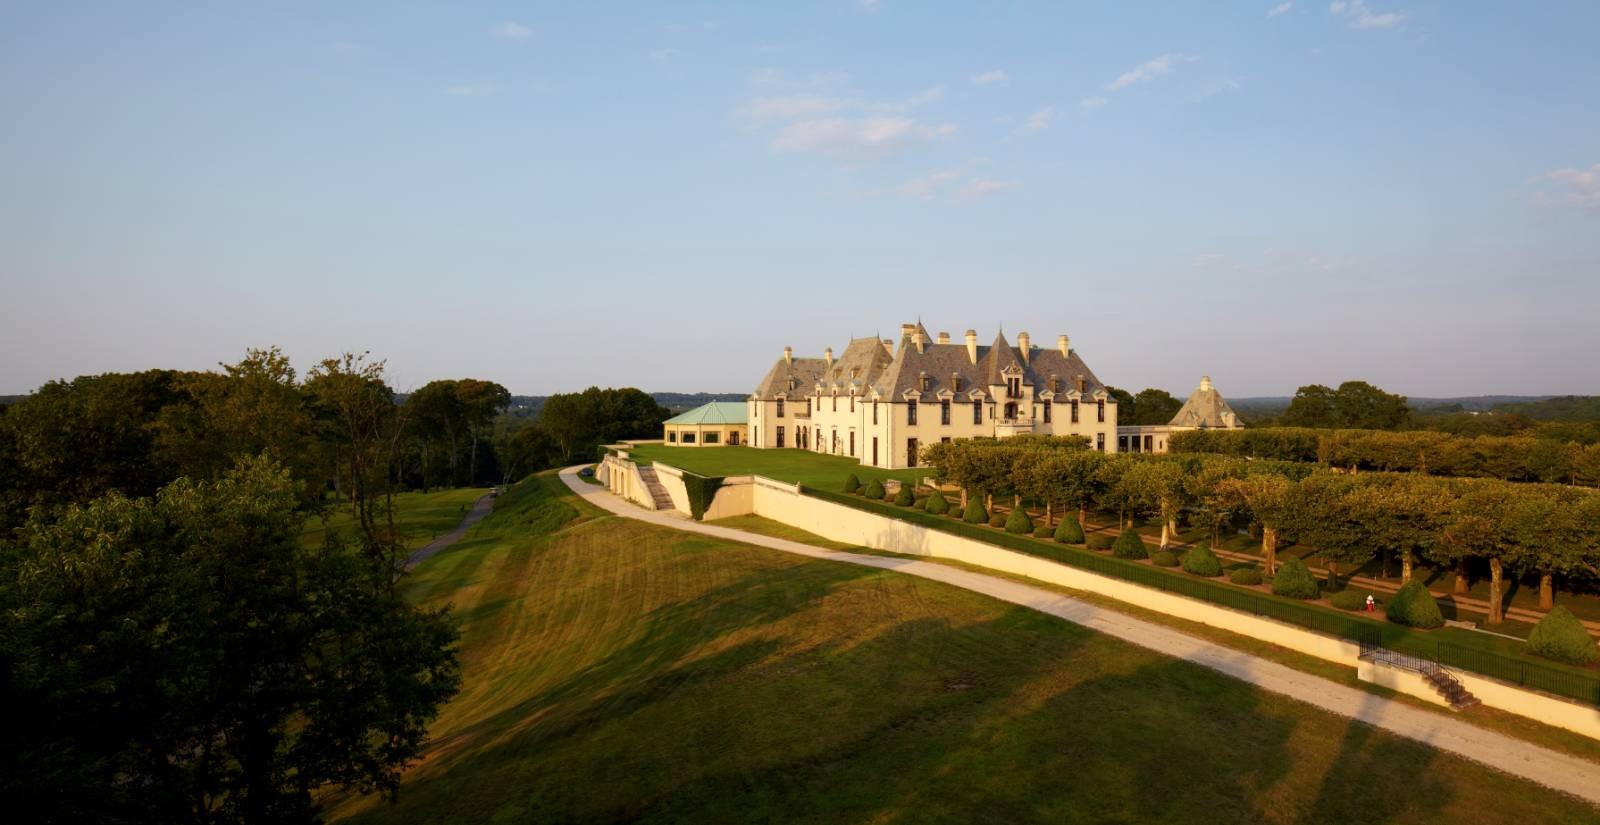 30 Biggest Houses In The World-Oheka Castle, New York, USA - Sheet2